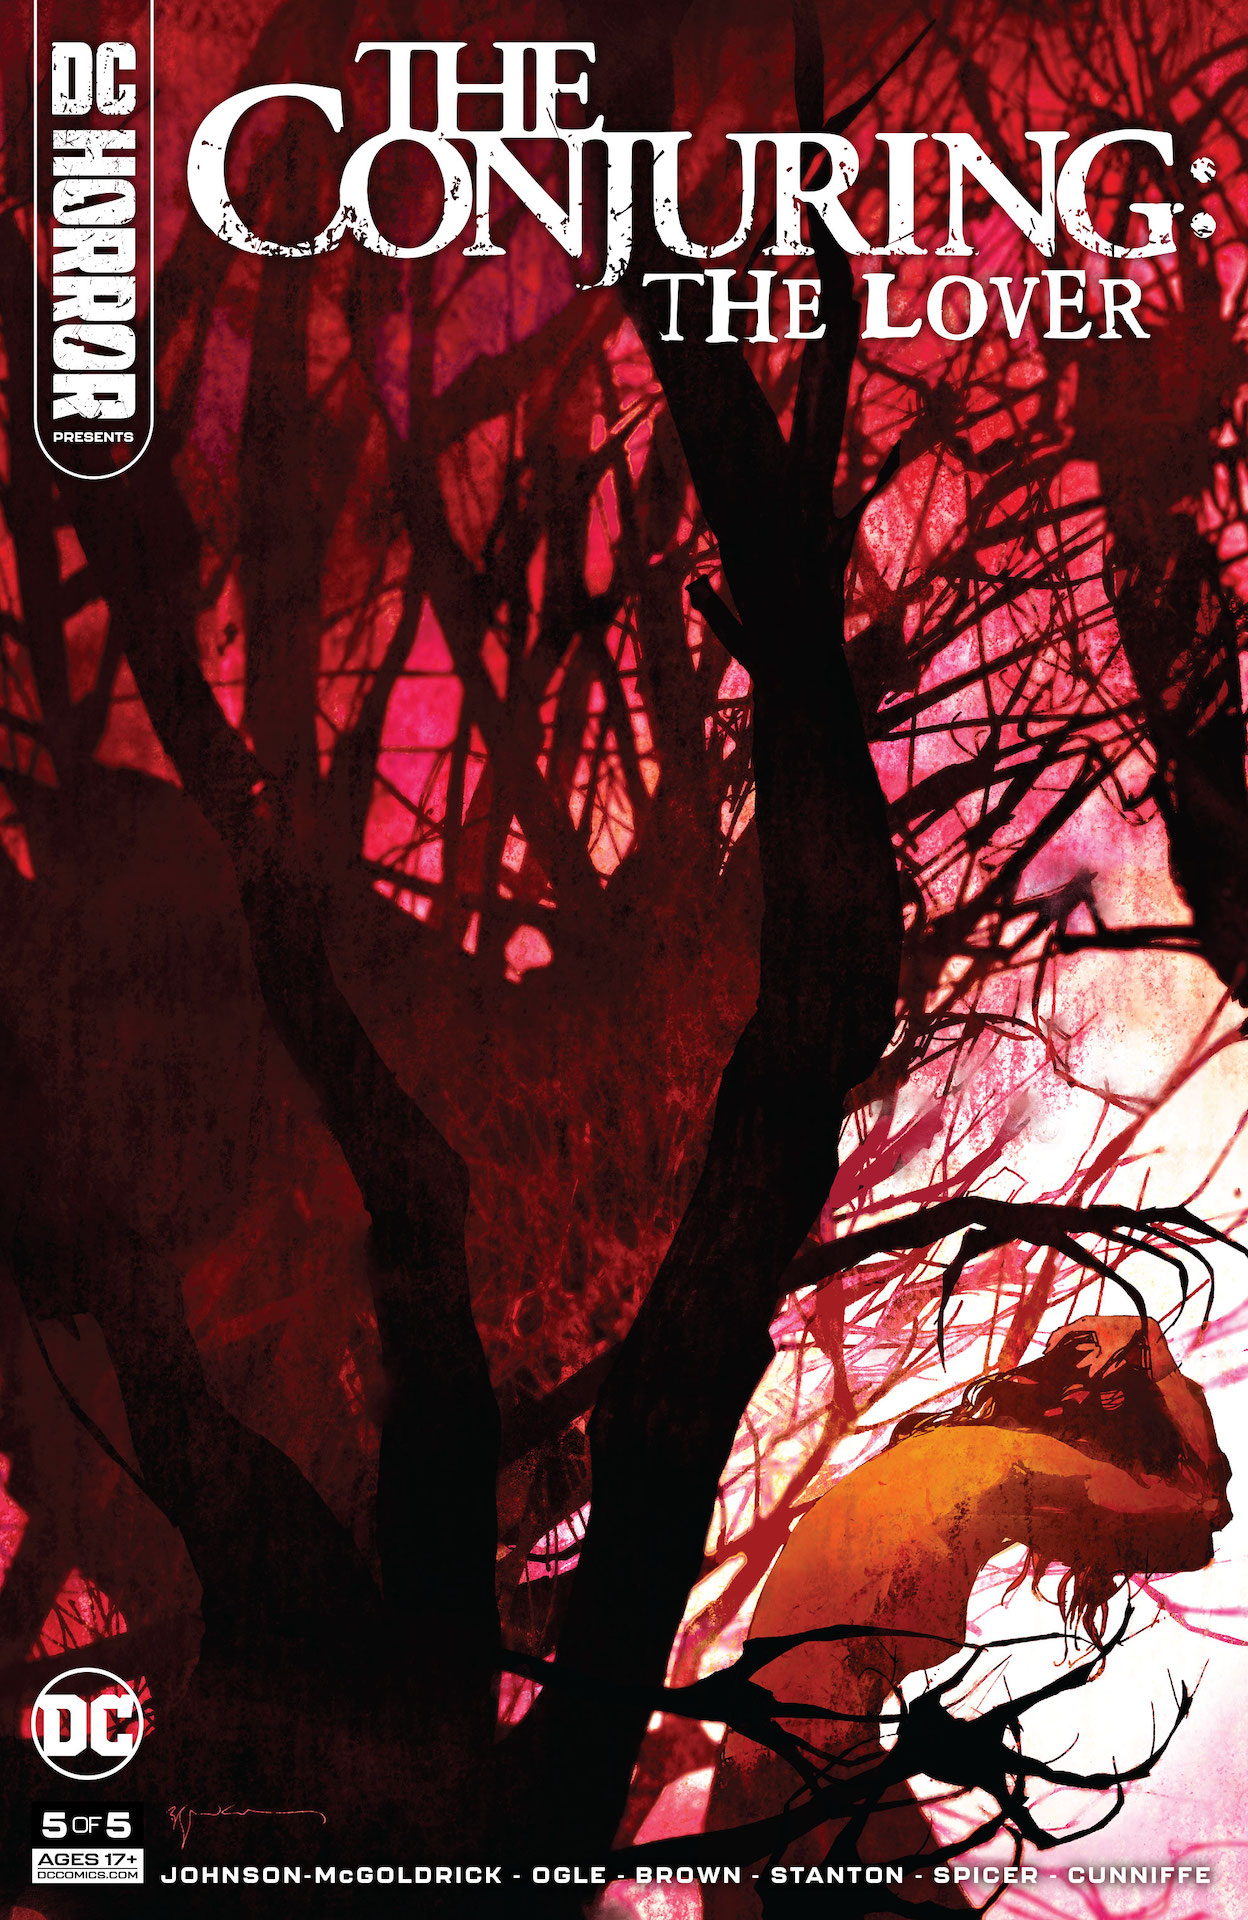 DC Preview: DC Horror Presents: The Conjuring The Lover #5